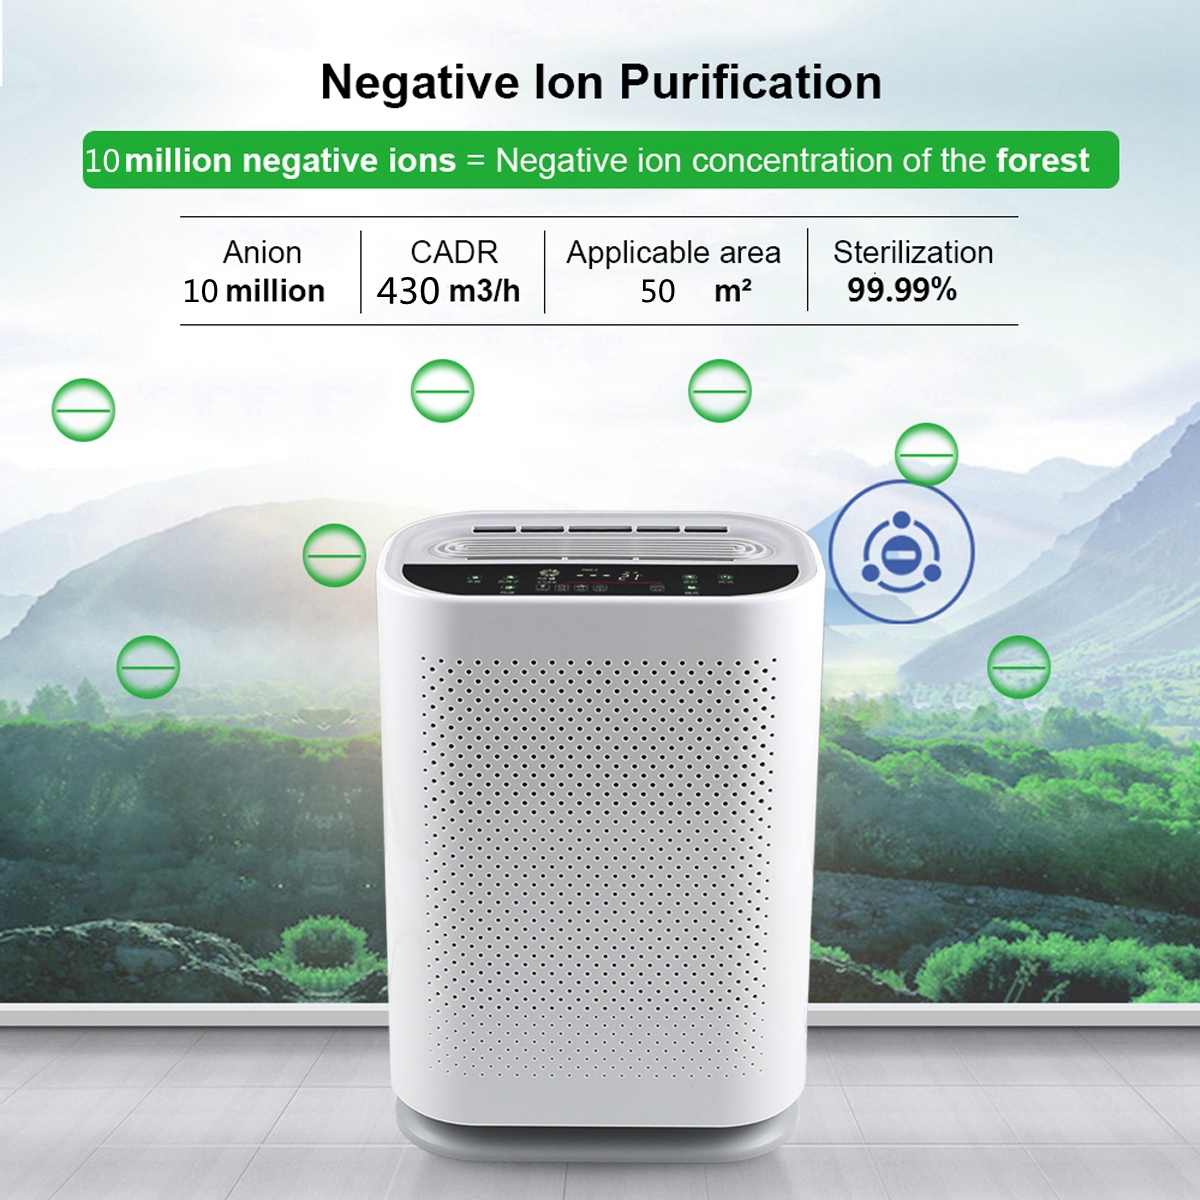 AUGIENB-Smart-Sensor-Air-Purifier-for-Home-Large-Room-With-True-HEPA-Filter-To-Remove-Smoke-Dust-Mol-1710011-4